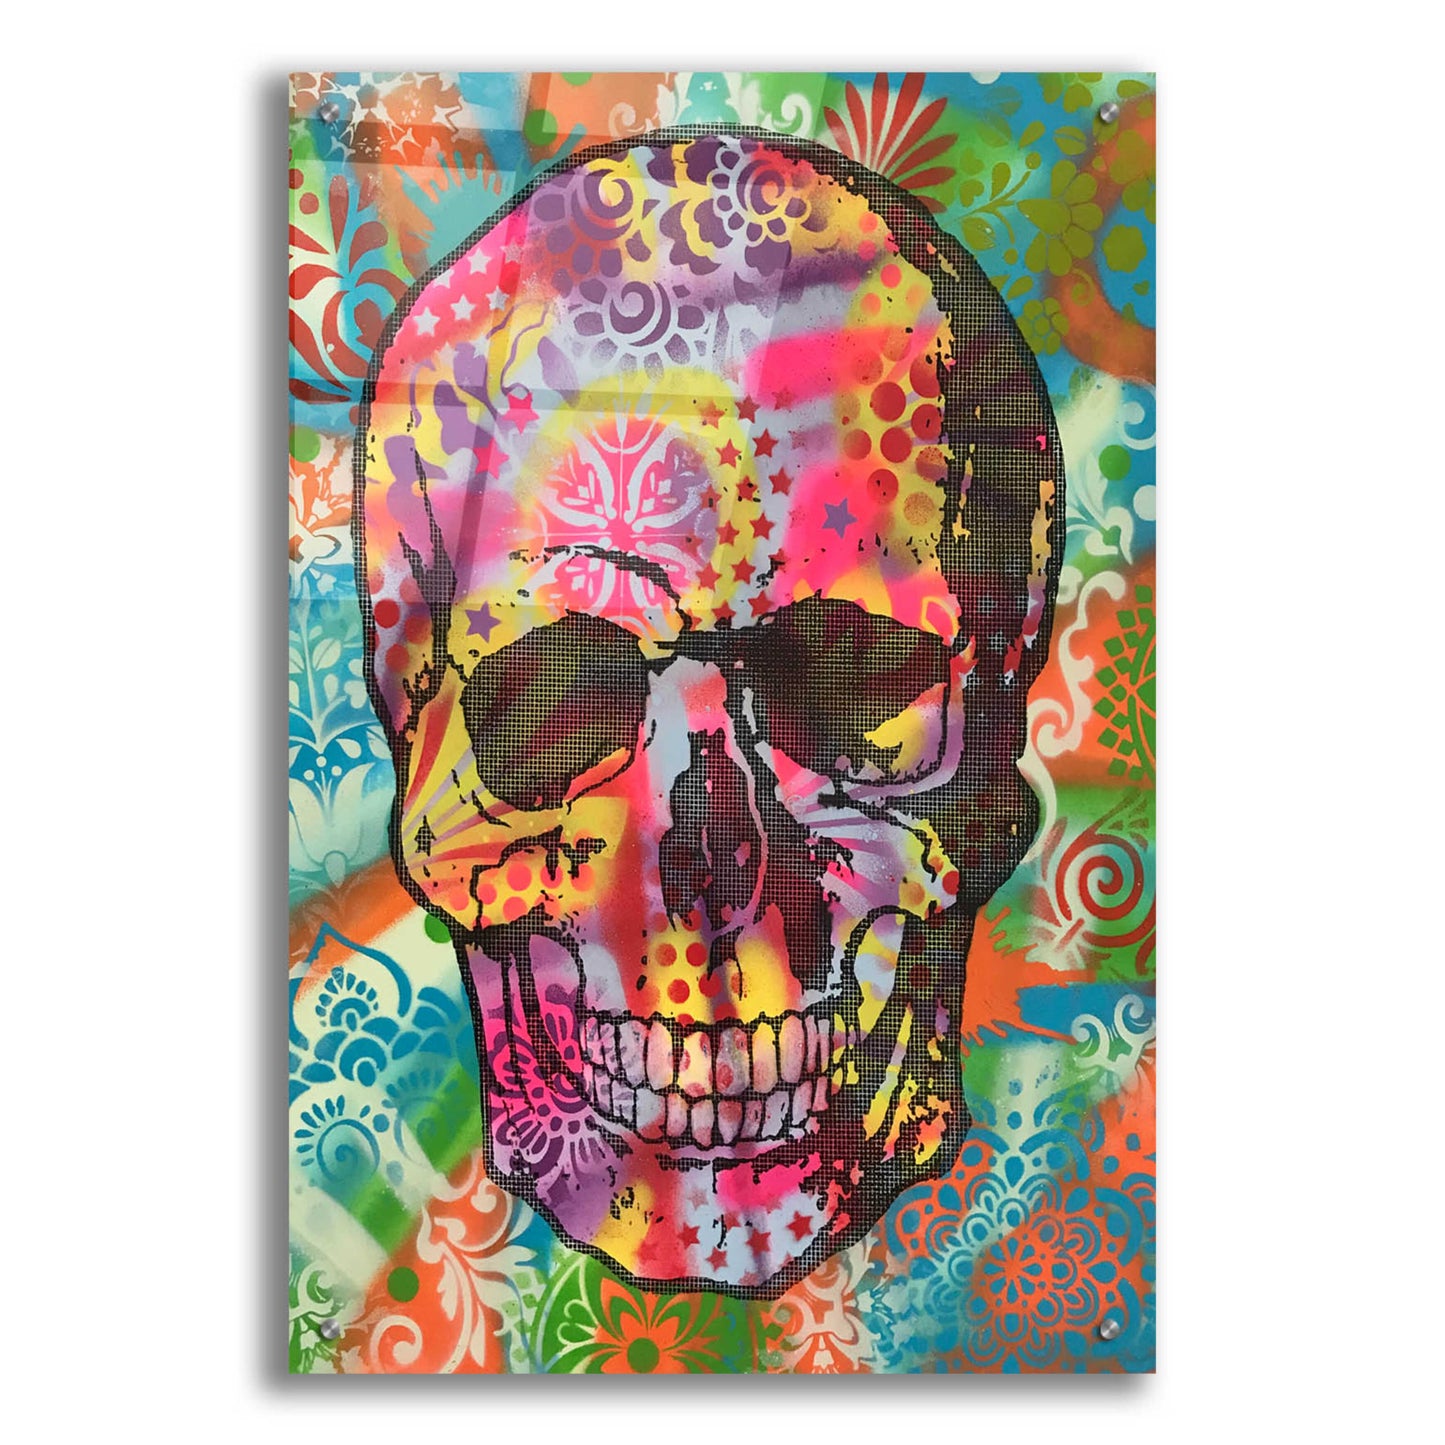 Epic Art 'Skull 1UP' by Dean Russo, Acrylic Glass Wall Art,24x36